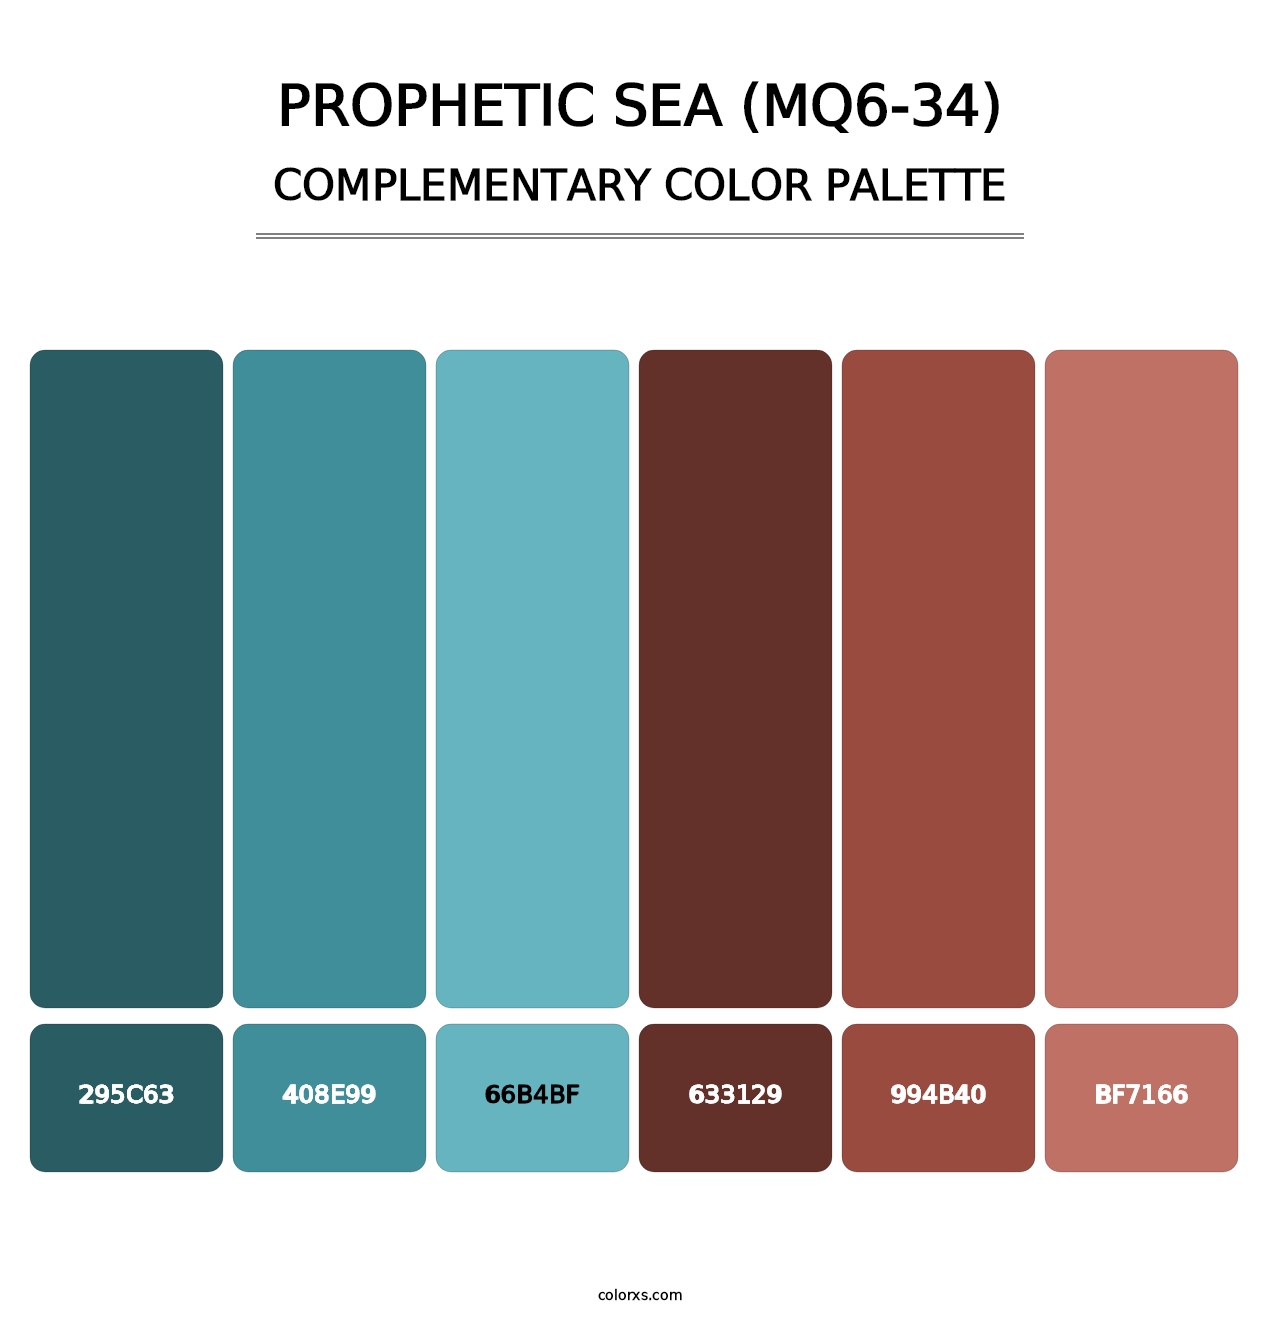 Prophetic Sea (MQ6-34) - Complementary Color Palette